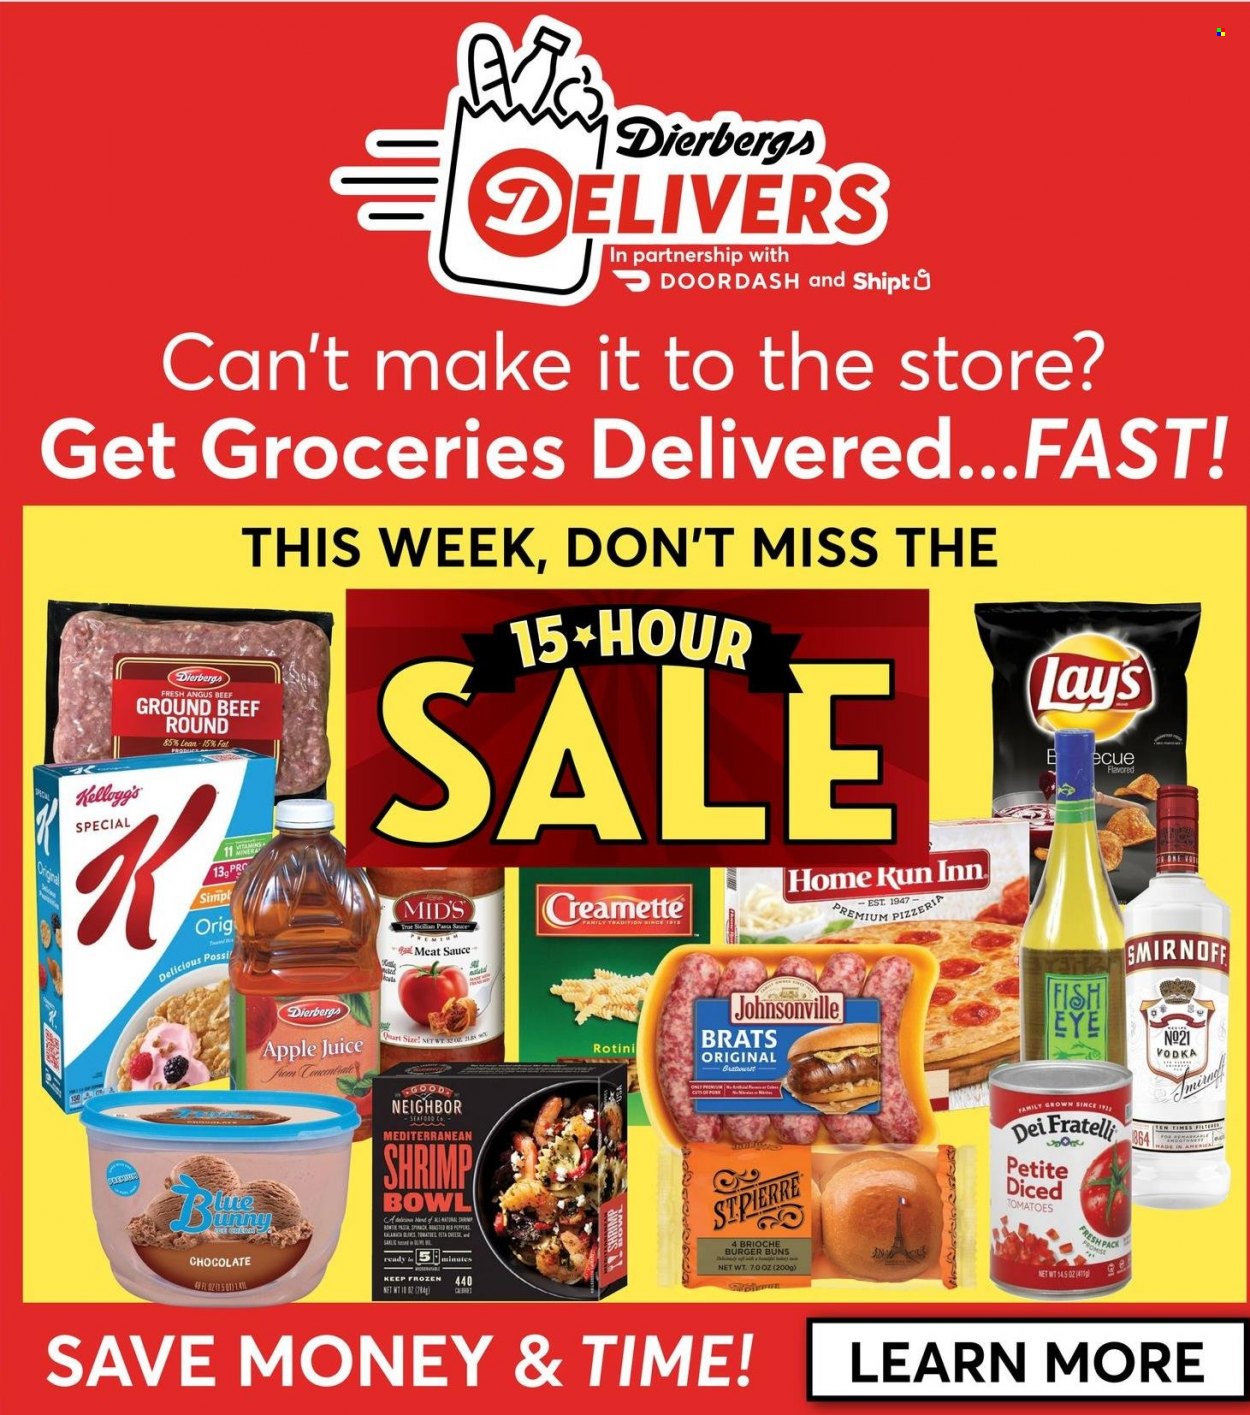 thumbnail - Dierbergs Flyer - 09/27/2022 - 10/03/2022 - Sales products - buns, burger buns, brioche, garlic, tomatoes, peppers, red peppers, seafood, shrimps, pasta sauce, sauce, Johnsonville, bratwurst, chocolate, Kellogg's, Lay’s, diced tomatoes, Creamette, apple juice, juice, Smirnoff, vodka, beef meat, ground beef. Page 10.